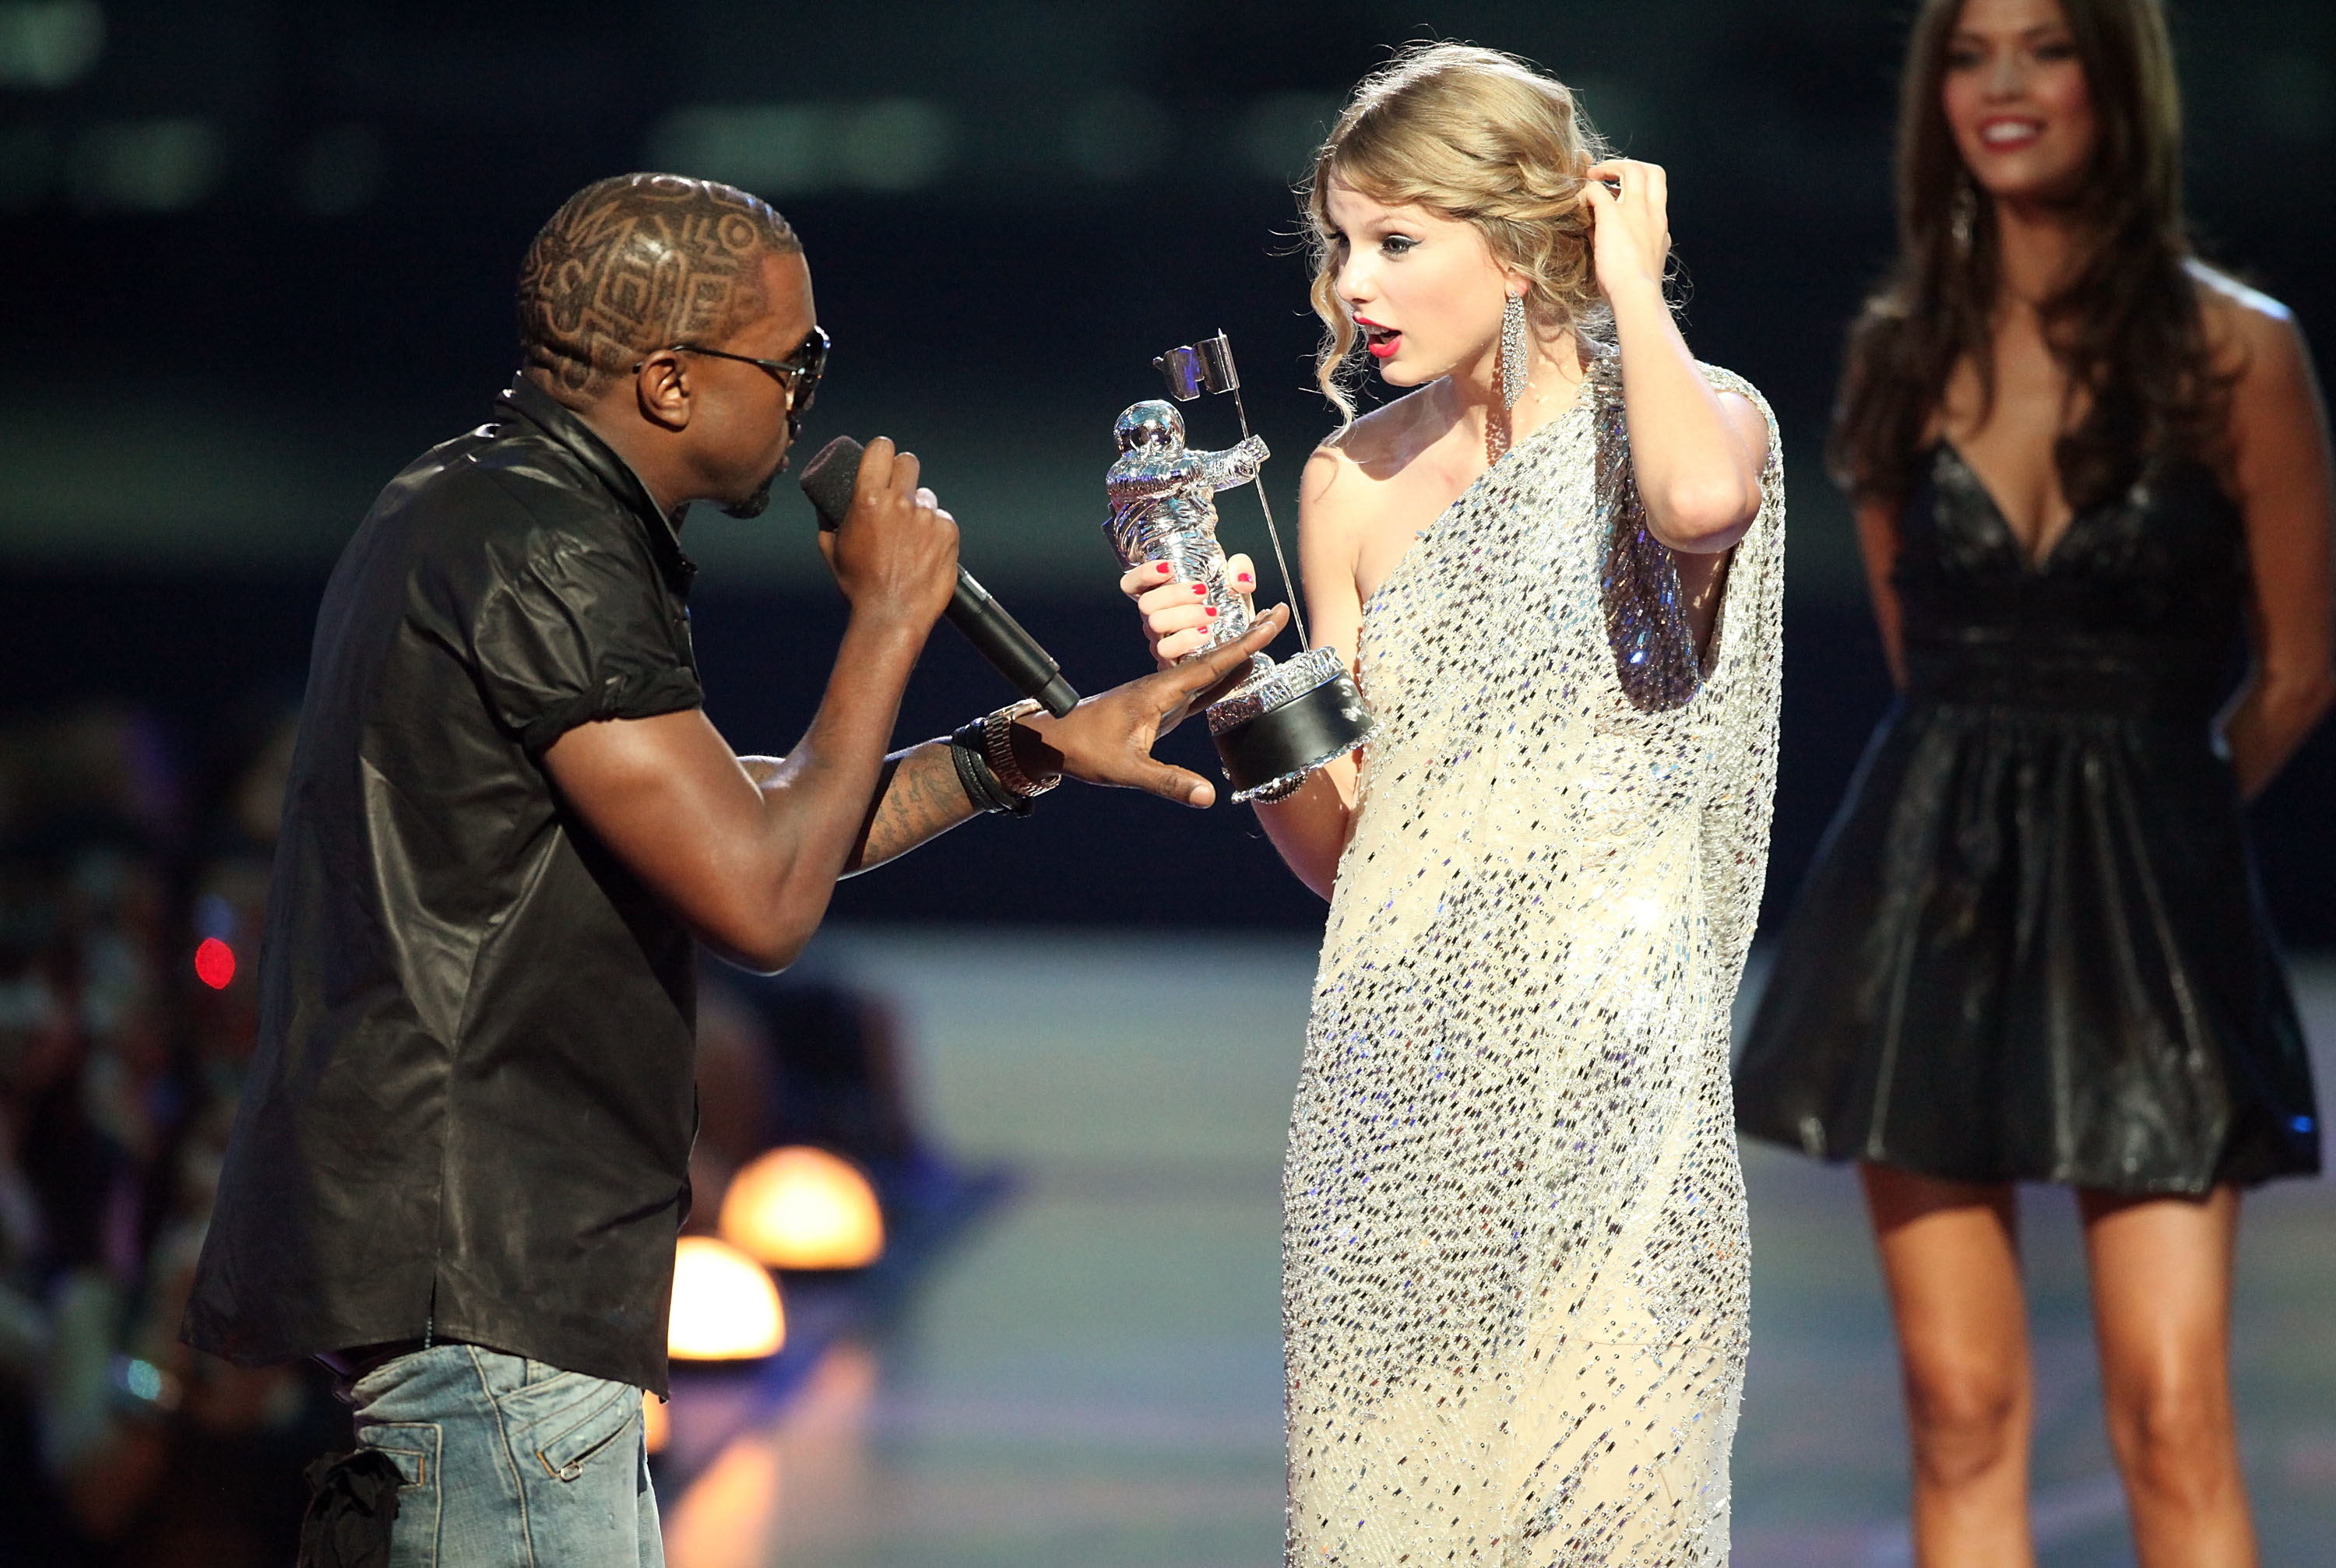 Kanye interrupting Taylor, who&#x27;s holding her VMA